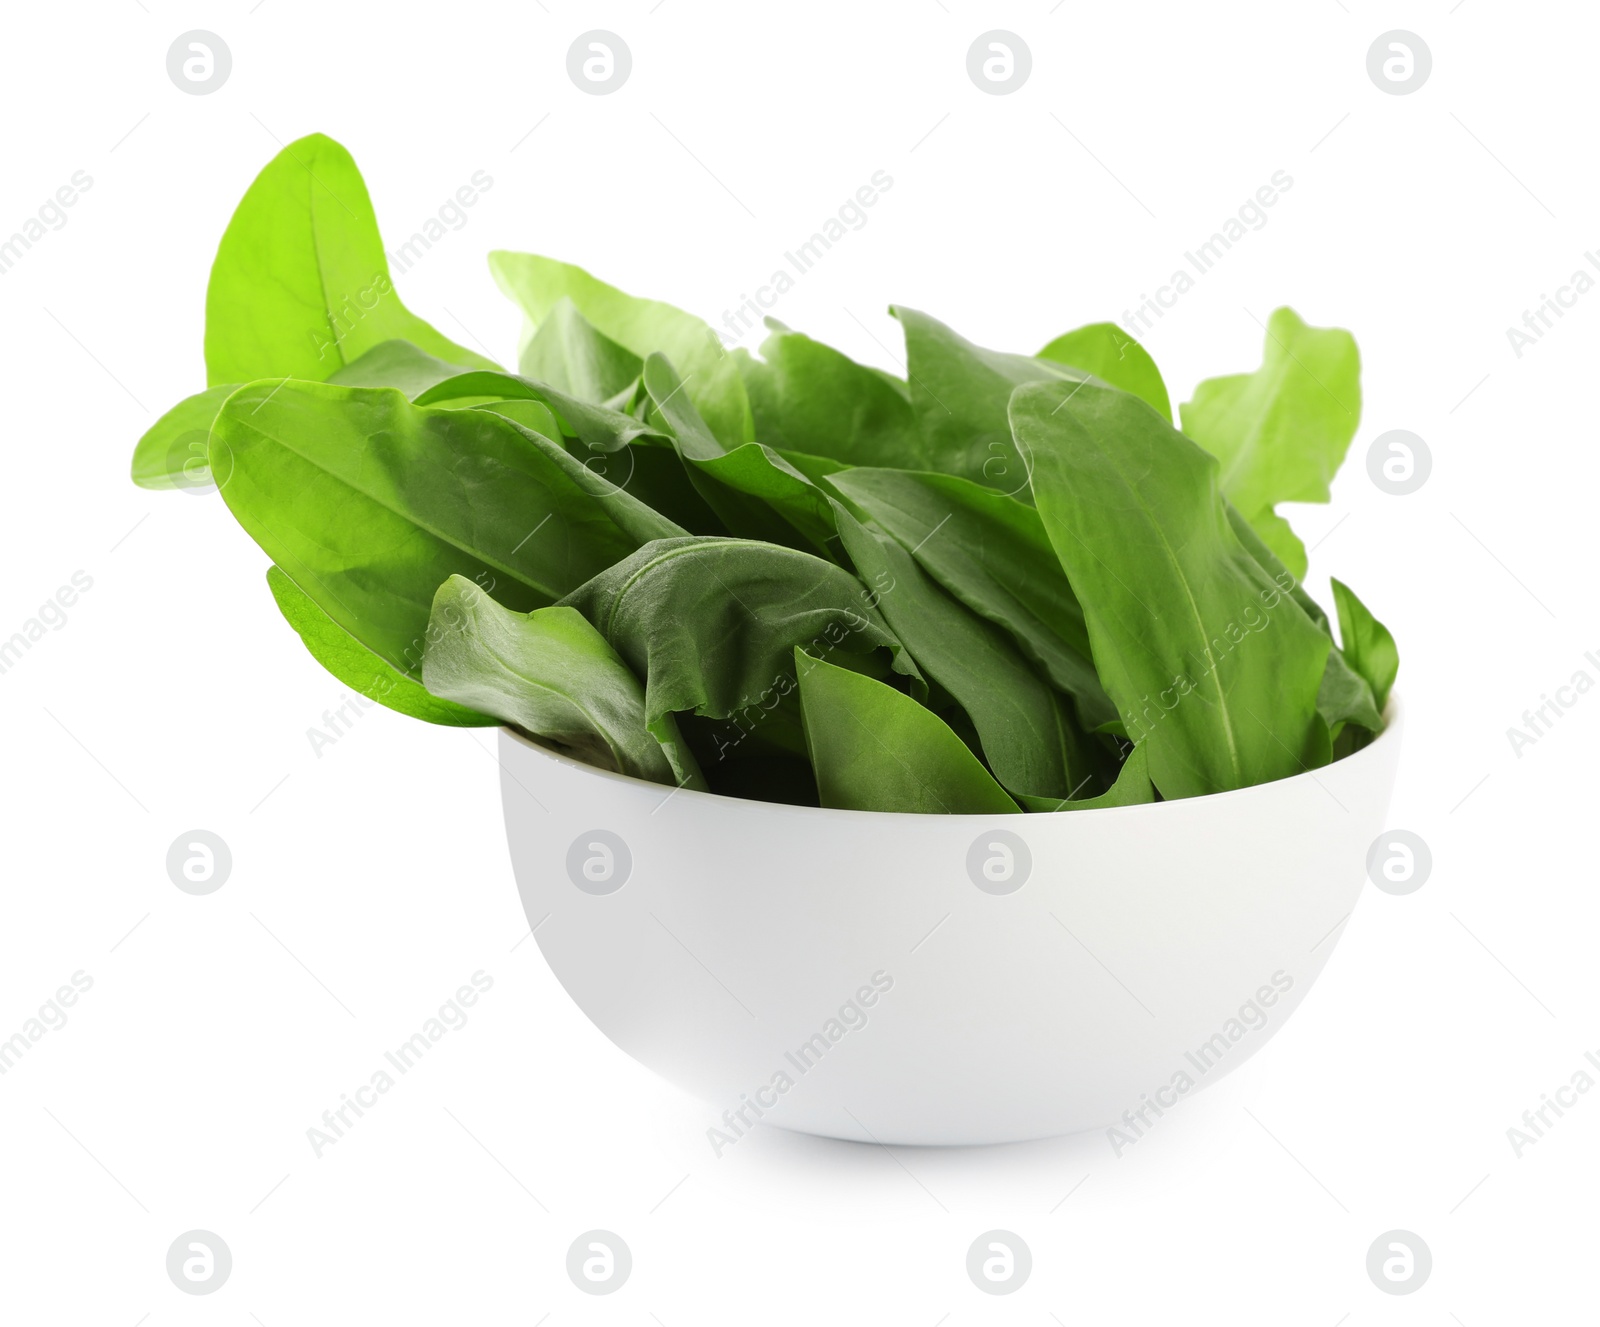 Photo of Fresh green sorrel leaves in bowl isolated on white